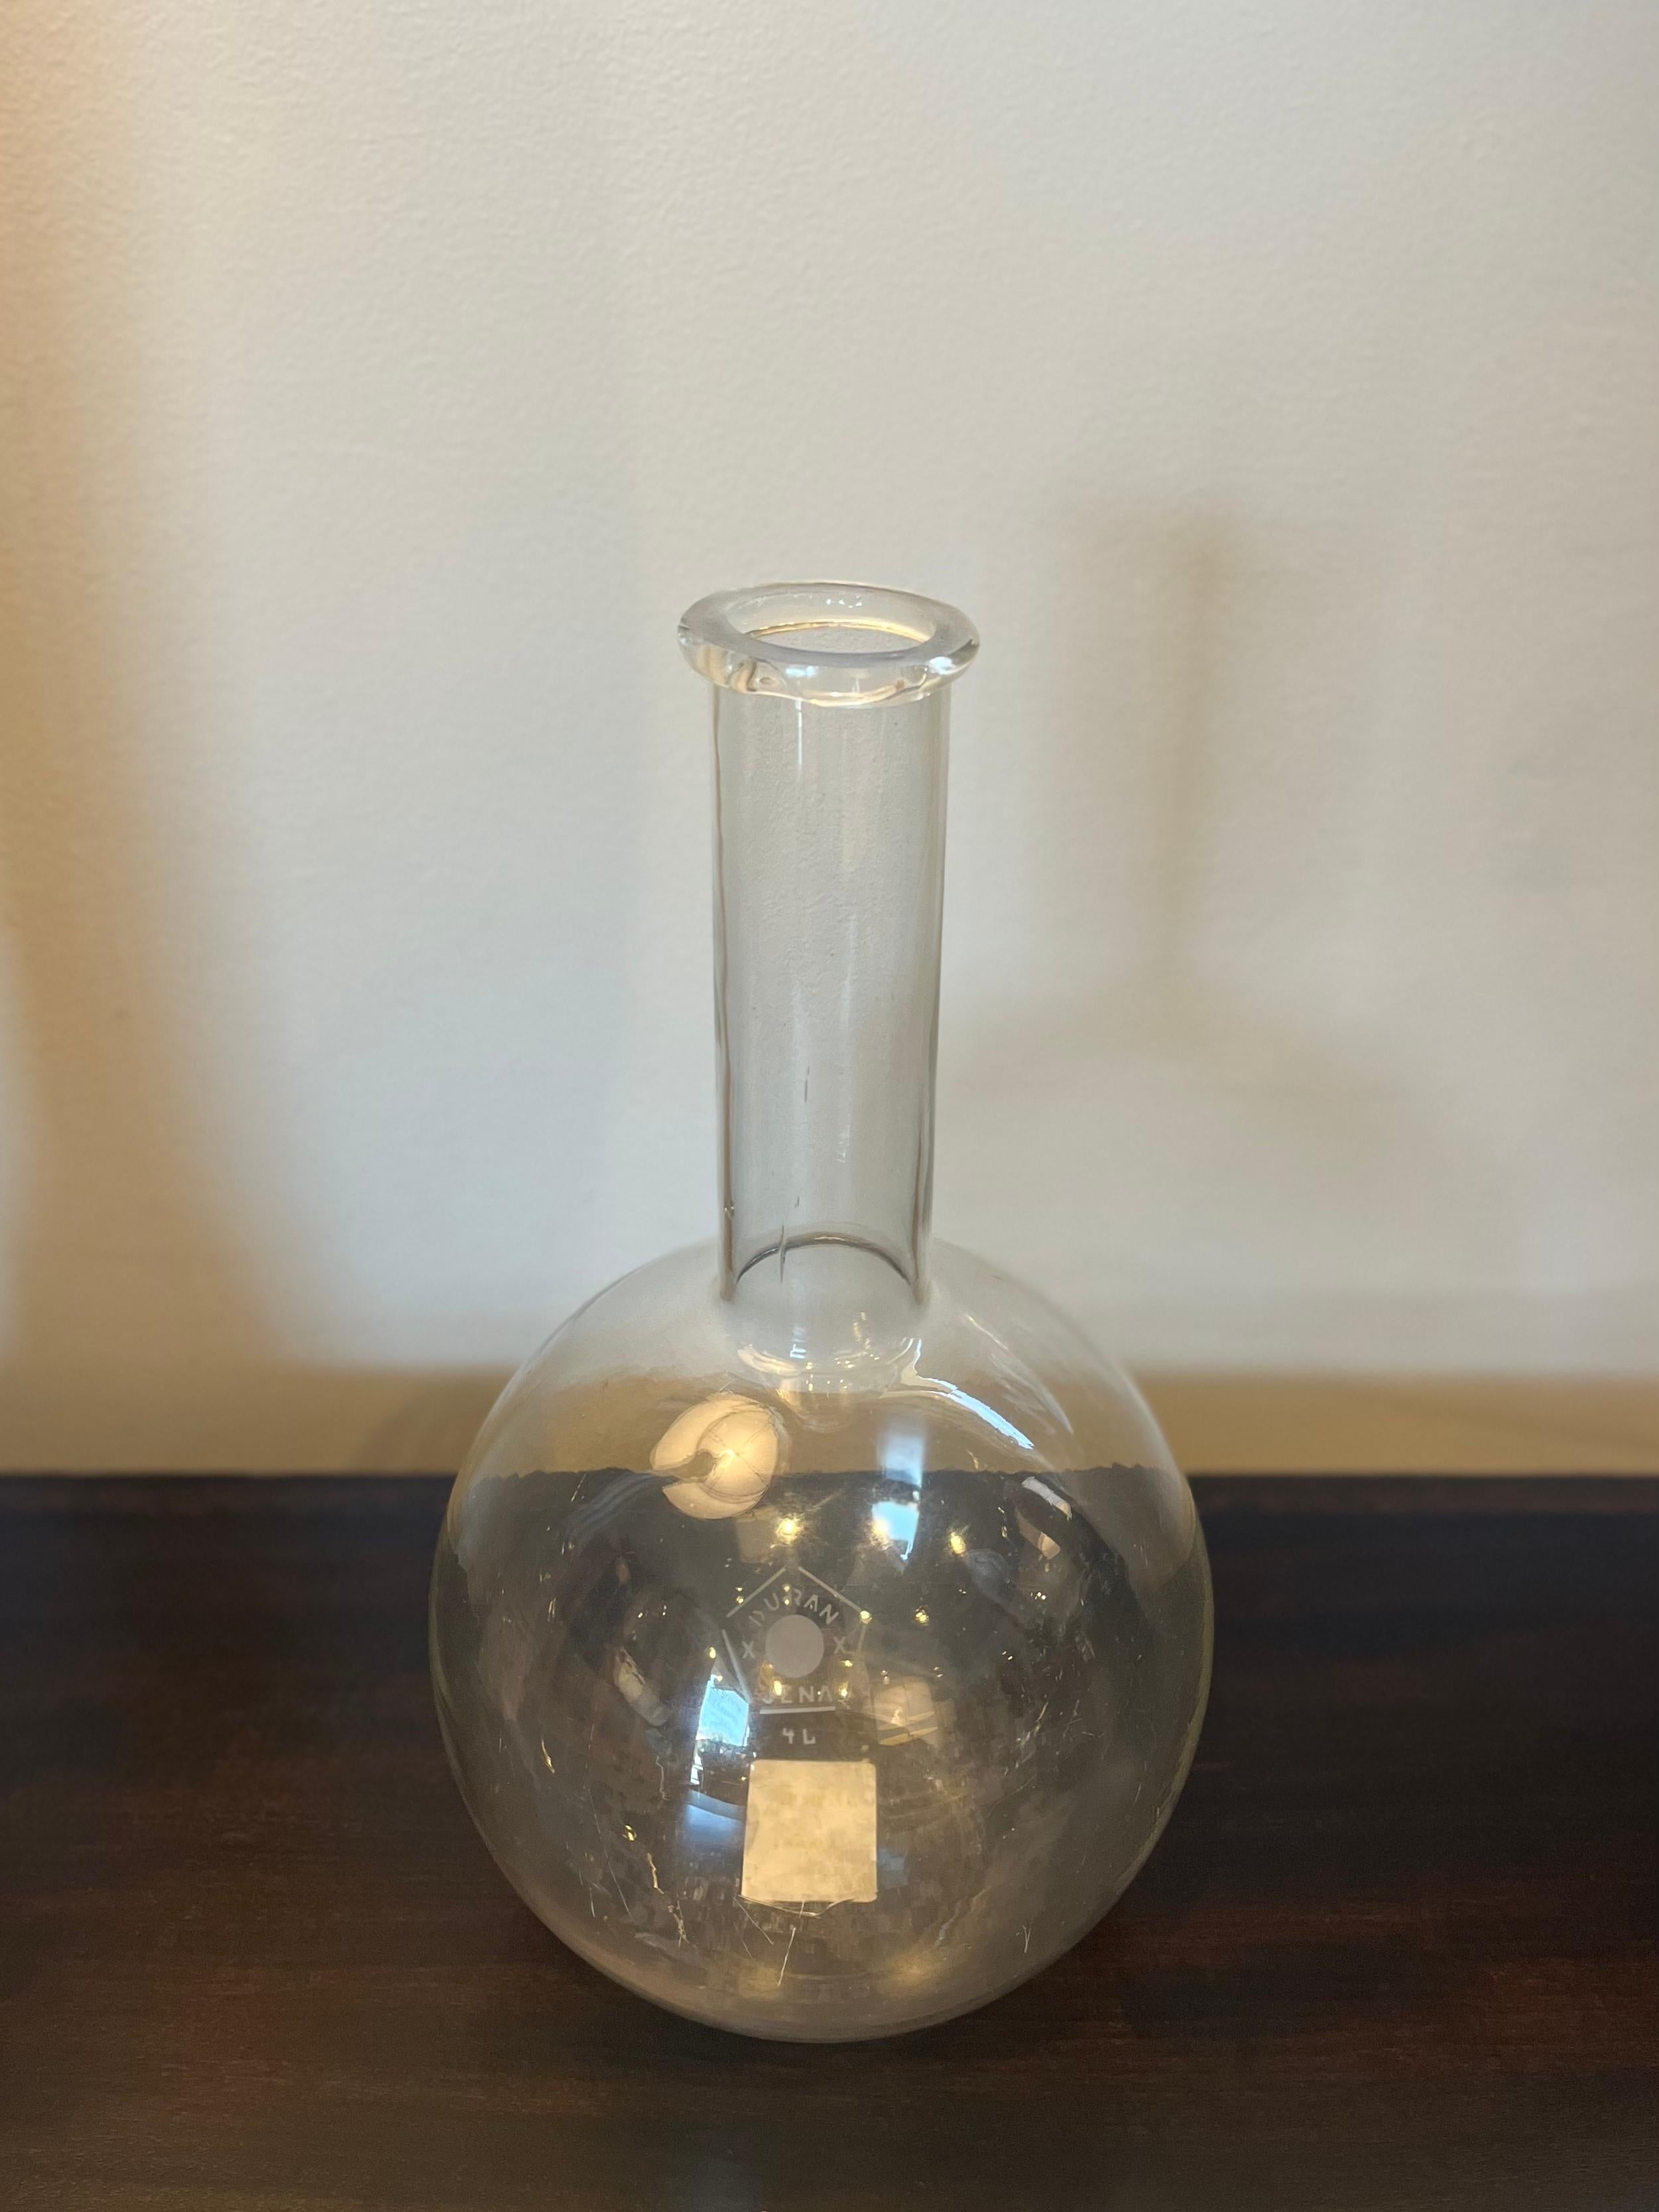 Glass chemist's beaker from 1900s France. With a spherical body and long cylindrical bottle neck, the vessel has a pleasingly modern shape. An excellent example of early an scientific apparatus, the piece could work as a vase or as a decorative